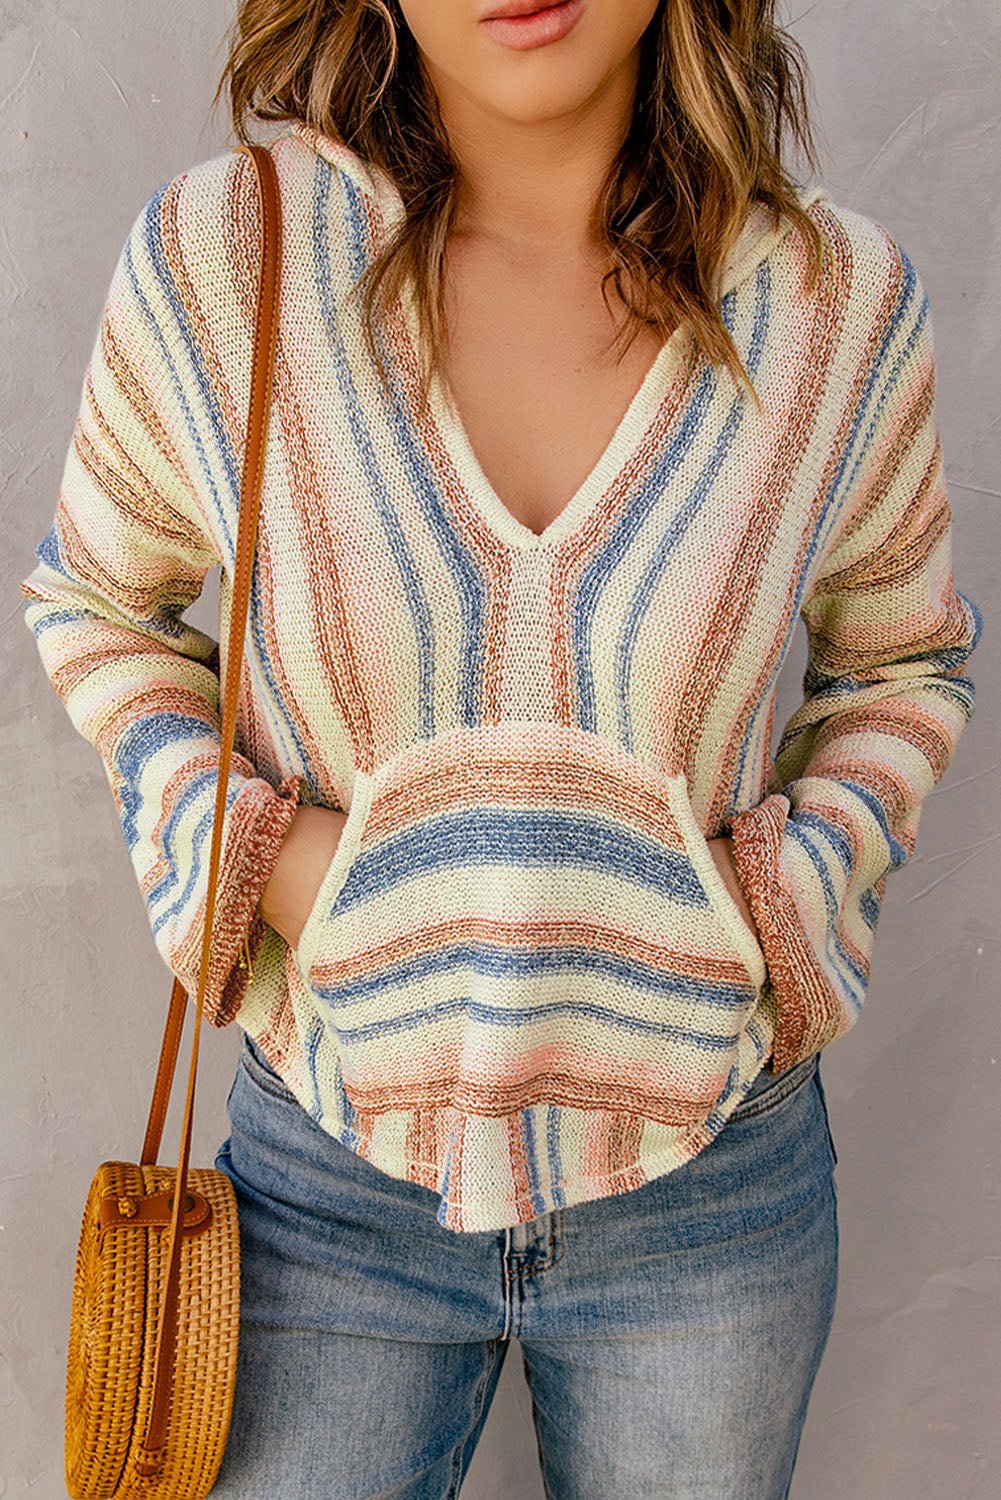 PopTrend Full Size Striped Hooded Sweater with Kangaroo Pocket